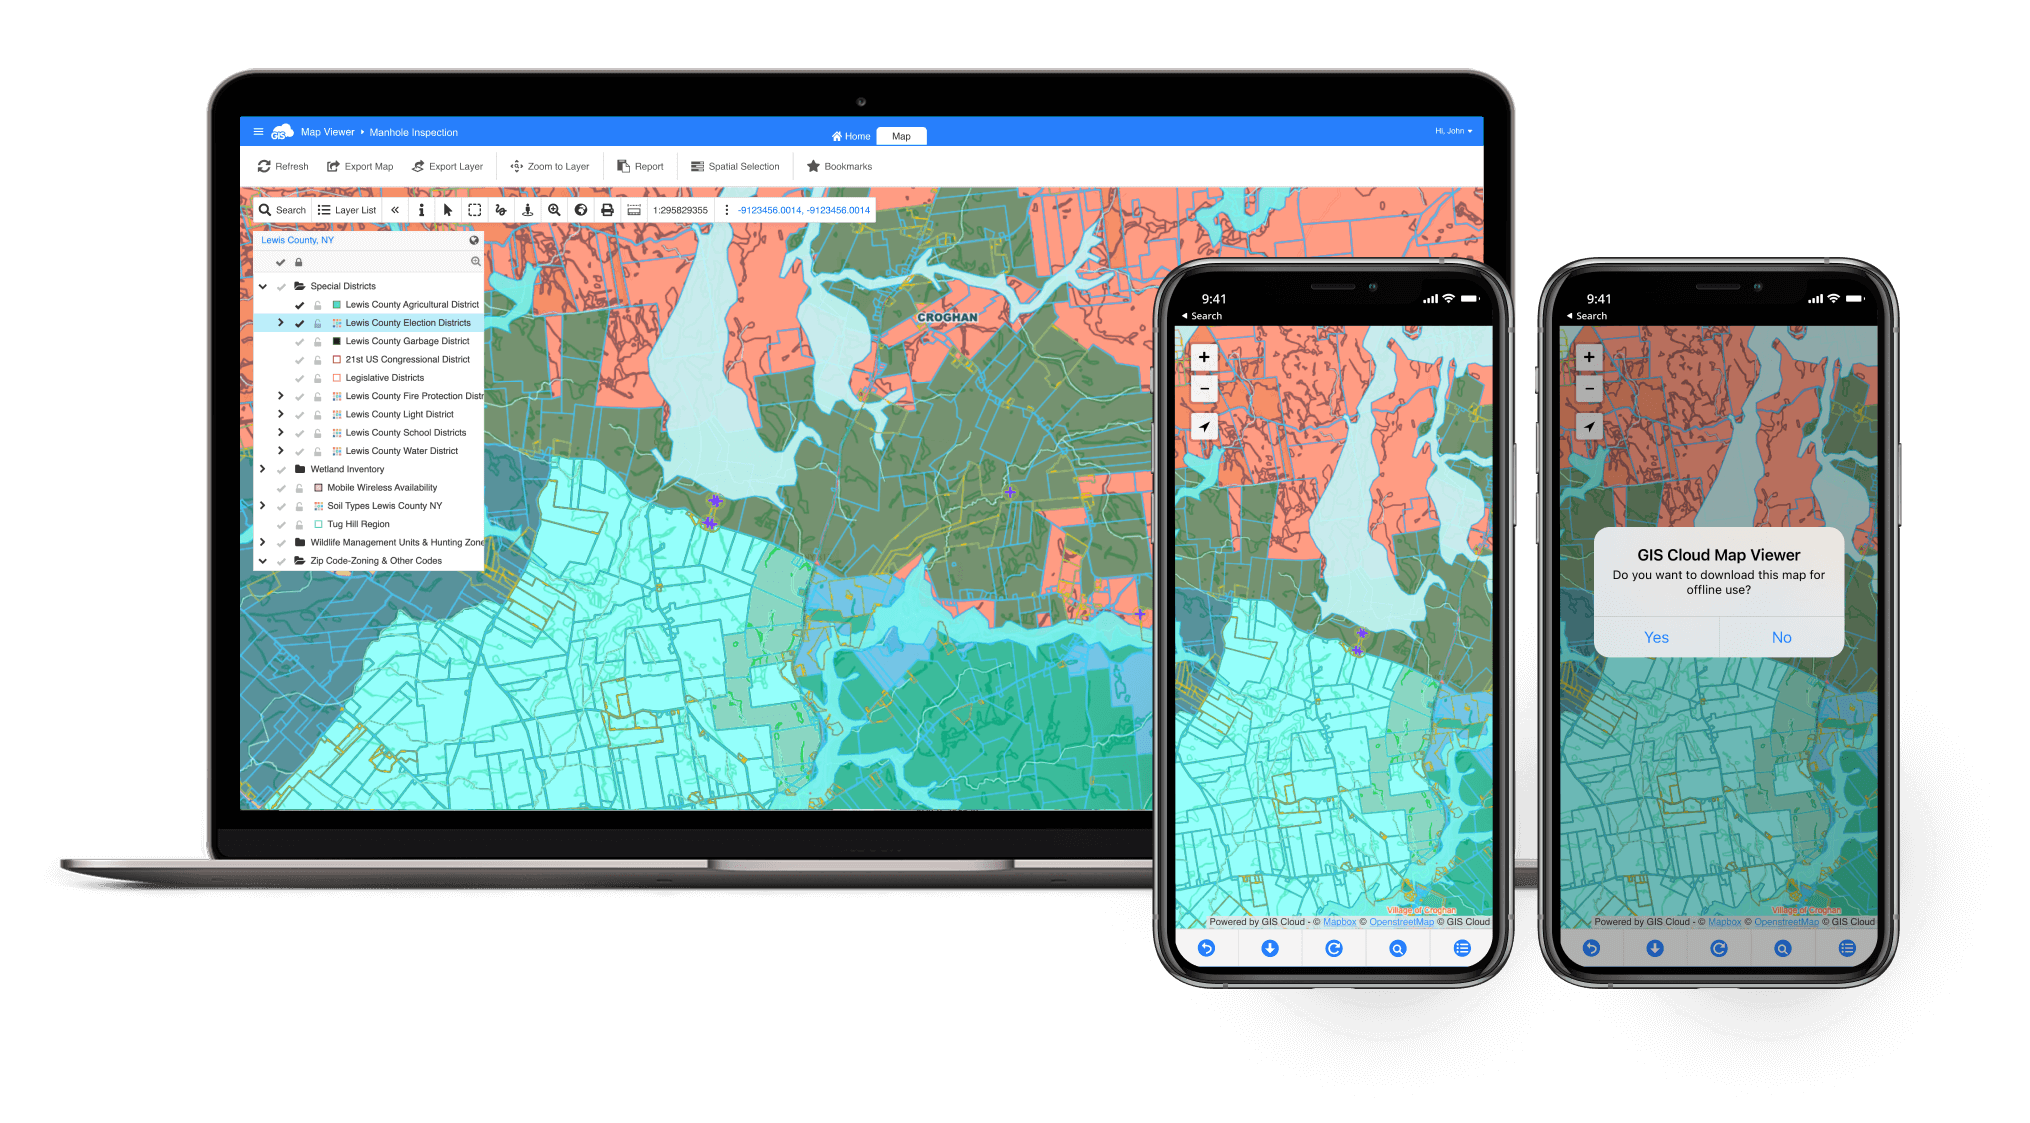 GIS Cloud’s Map Viewer is a simple app to view and access shared maps and data on the go, online or offline.